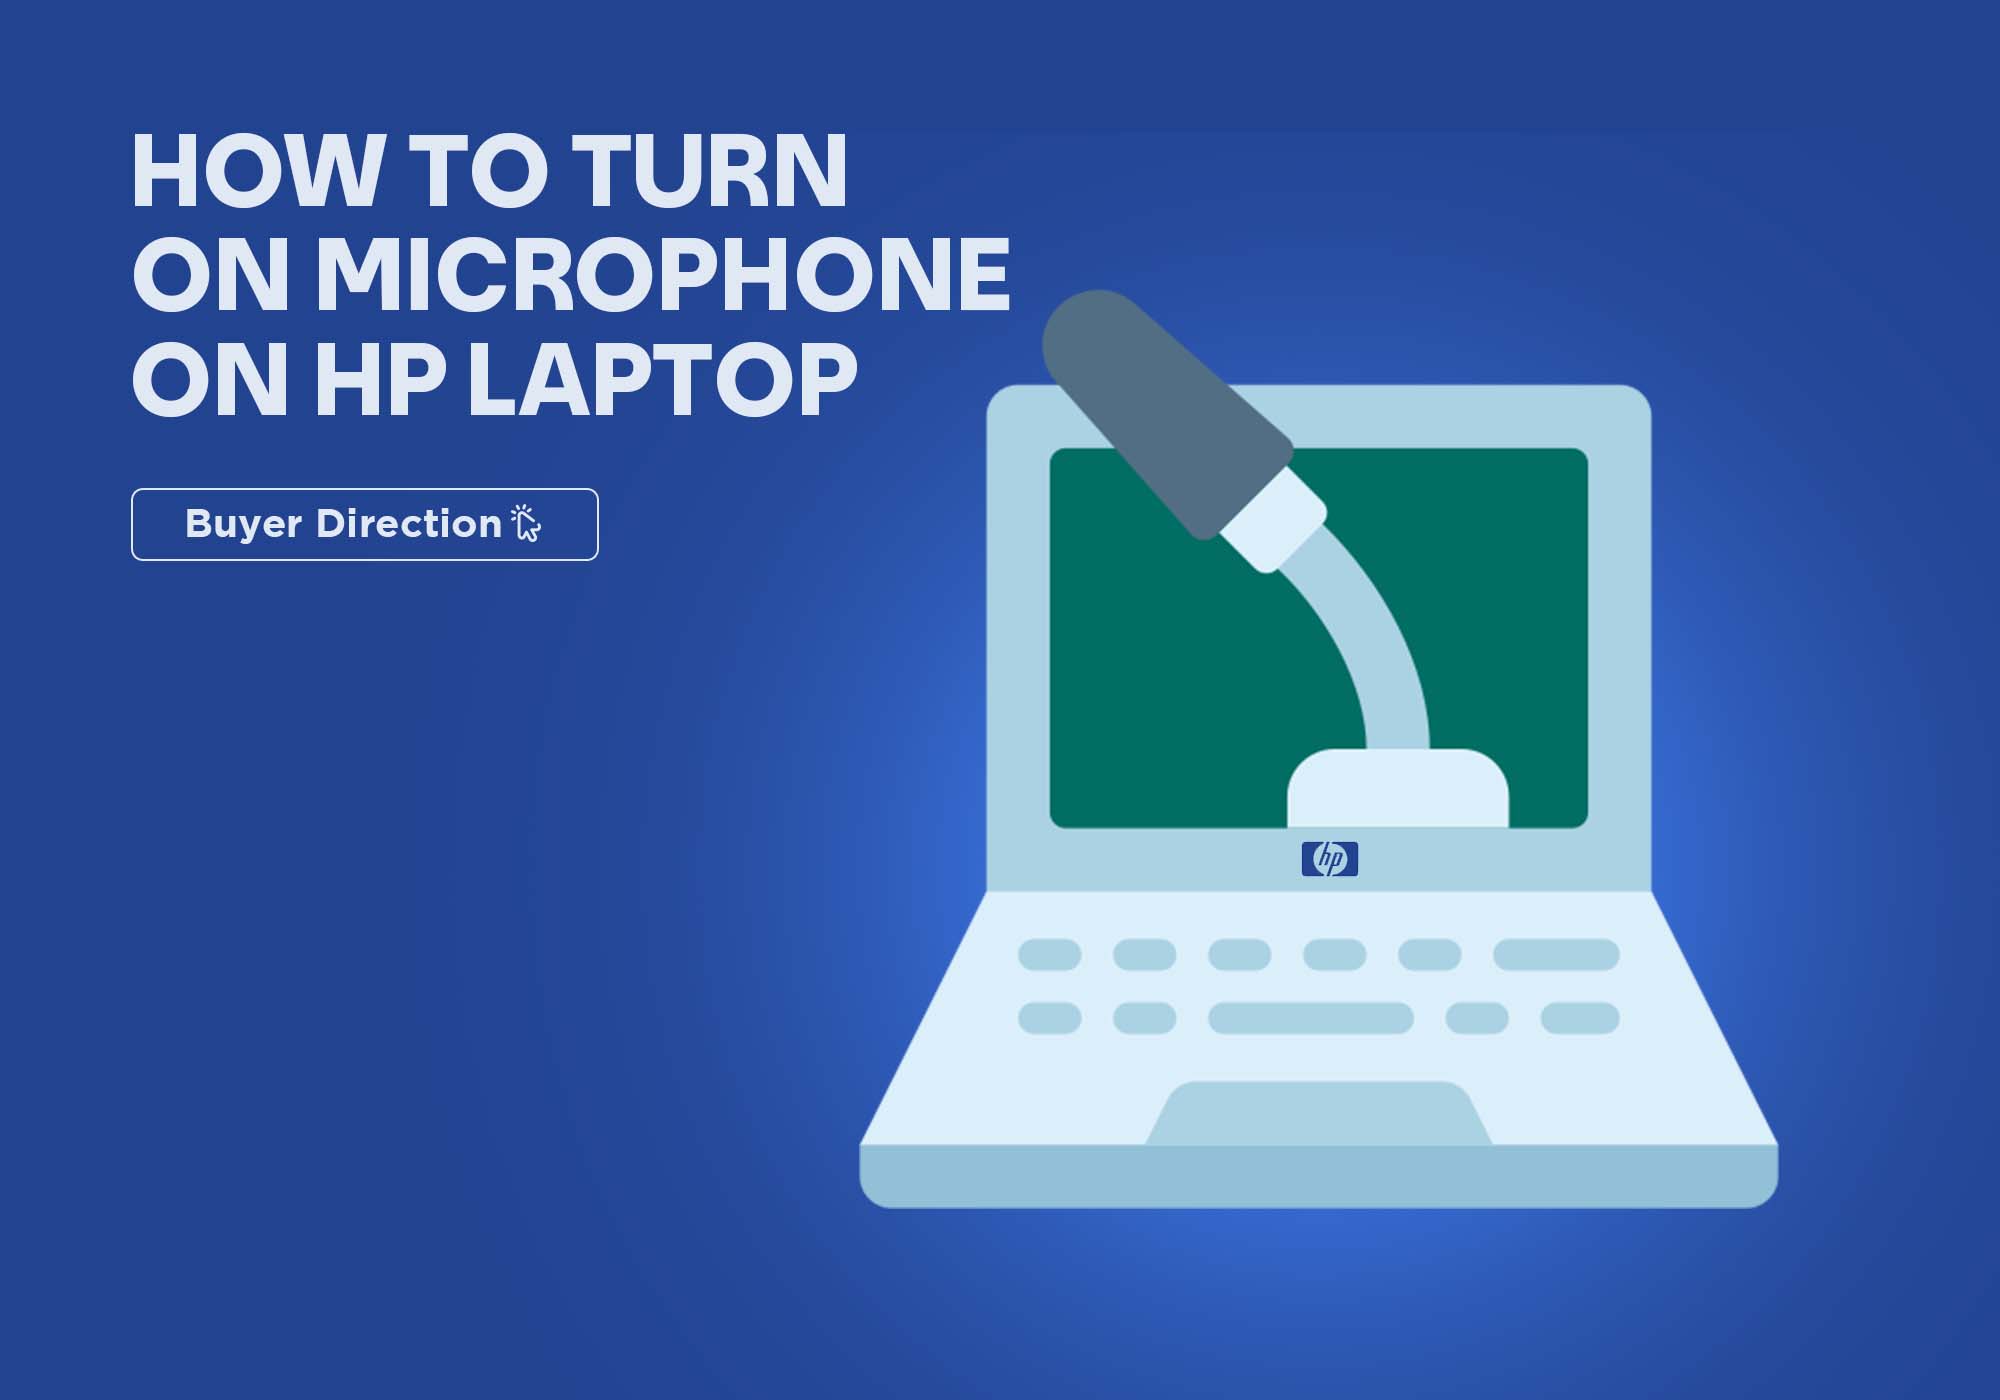 How to Turn on Microphone on hp Laptop